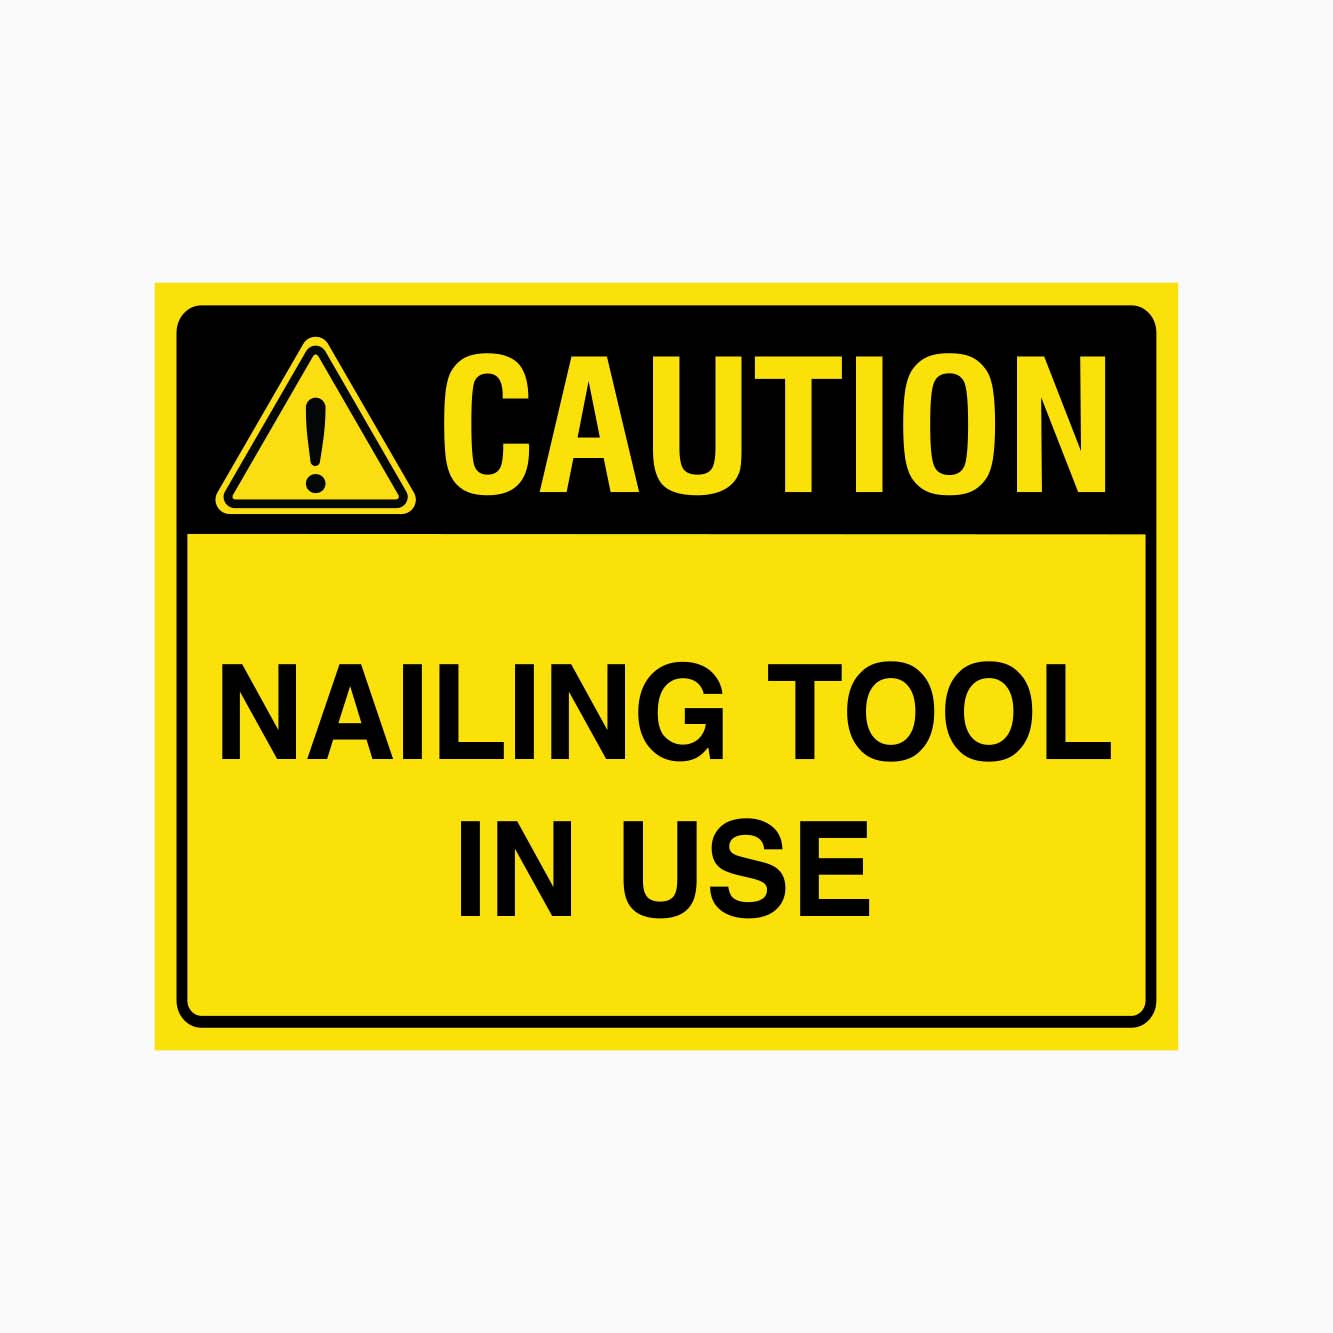 CAUTION NAILING TOOL IN USE SIGN - GET SIGNS